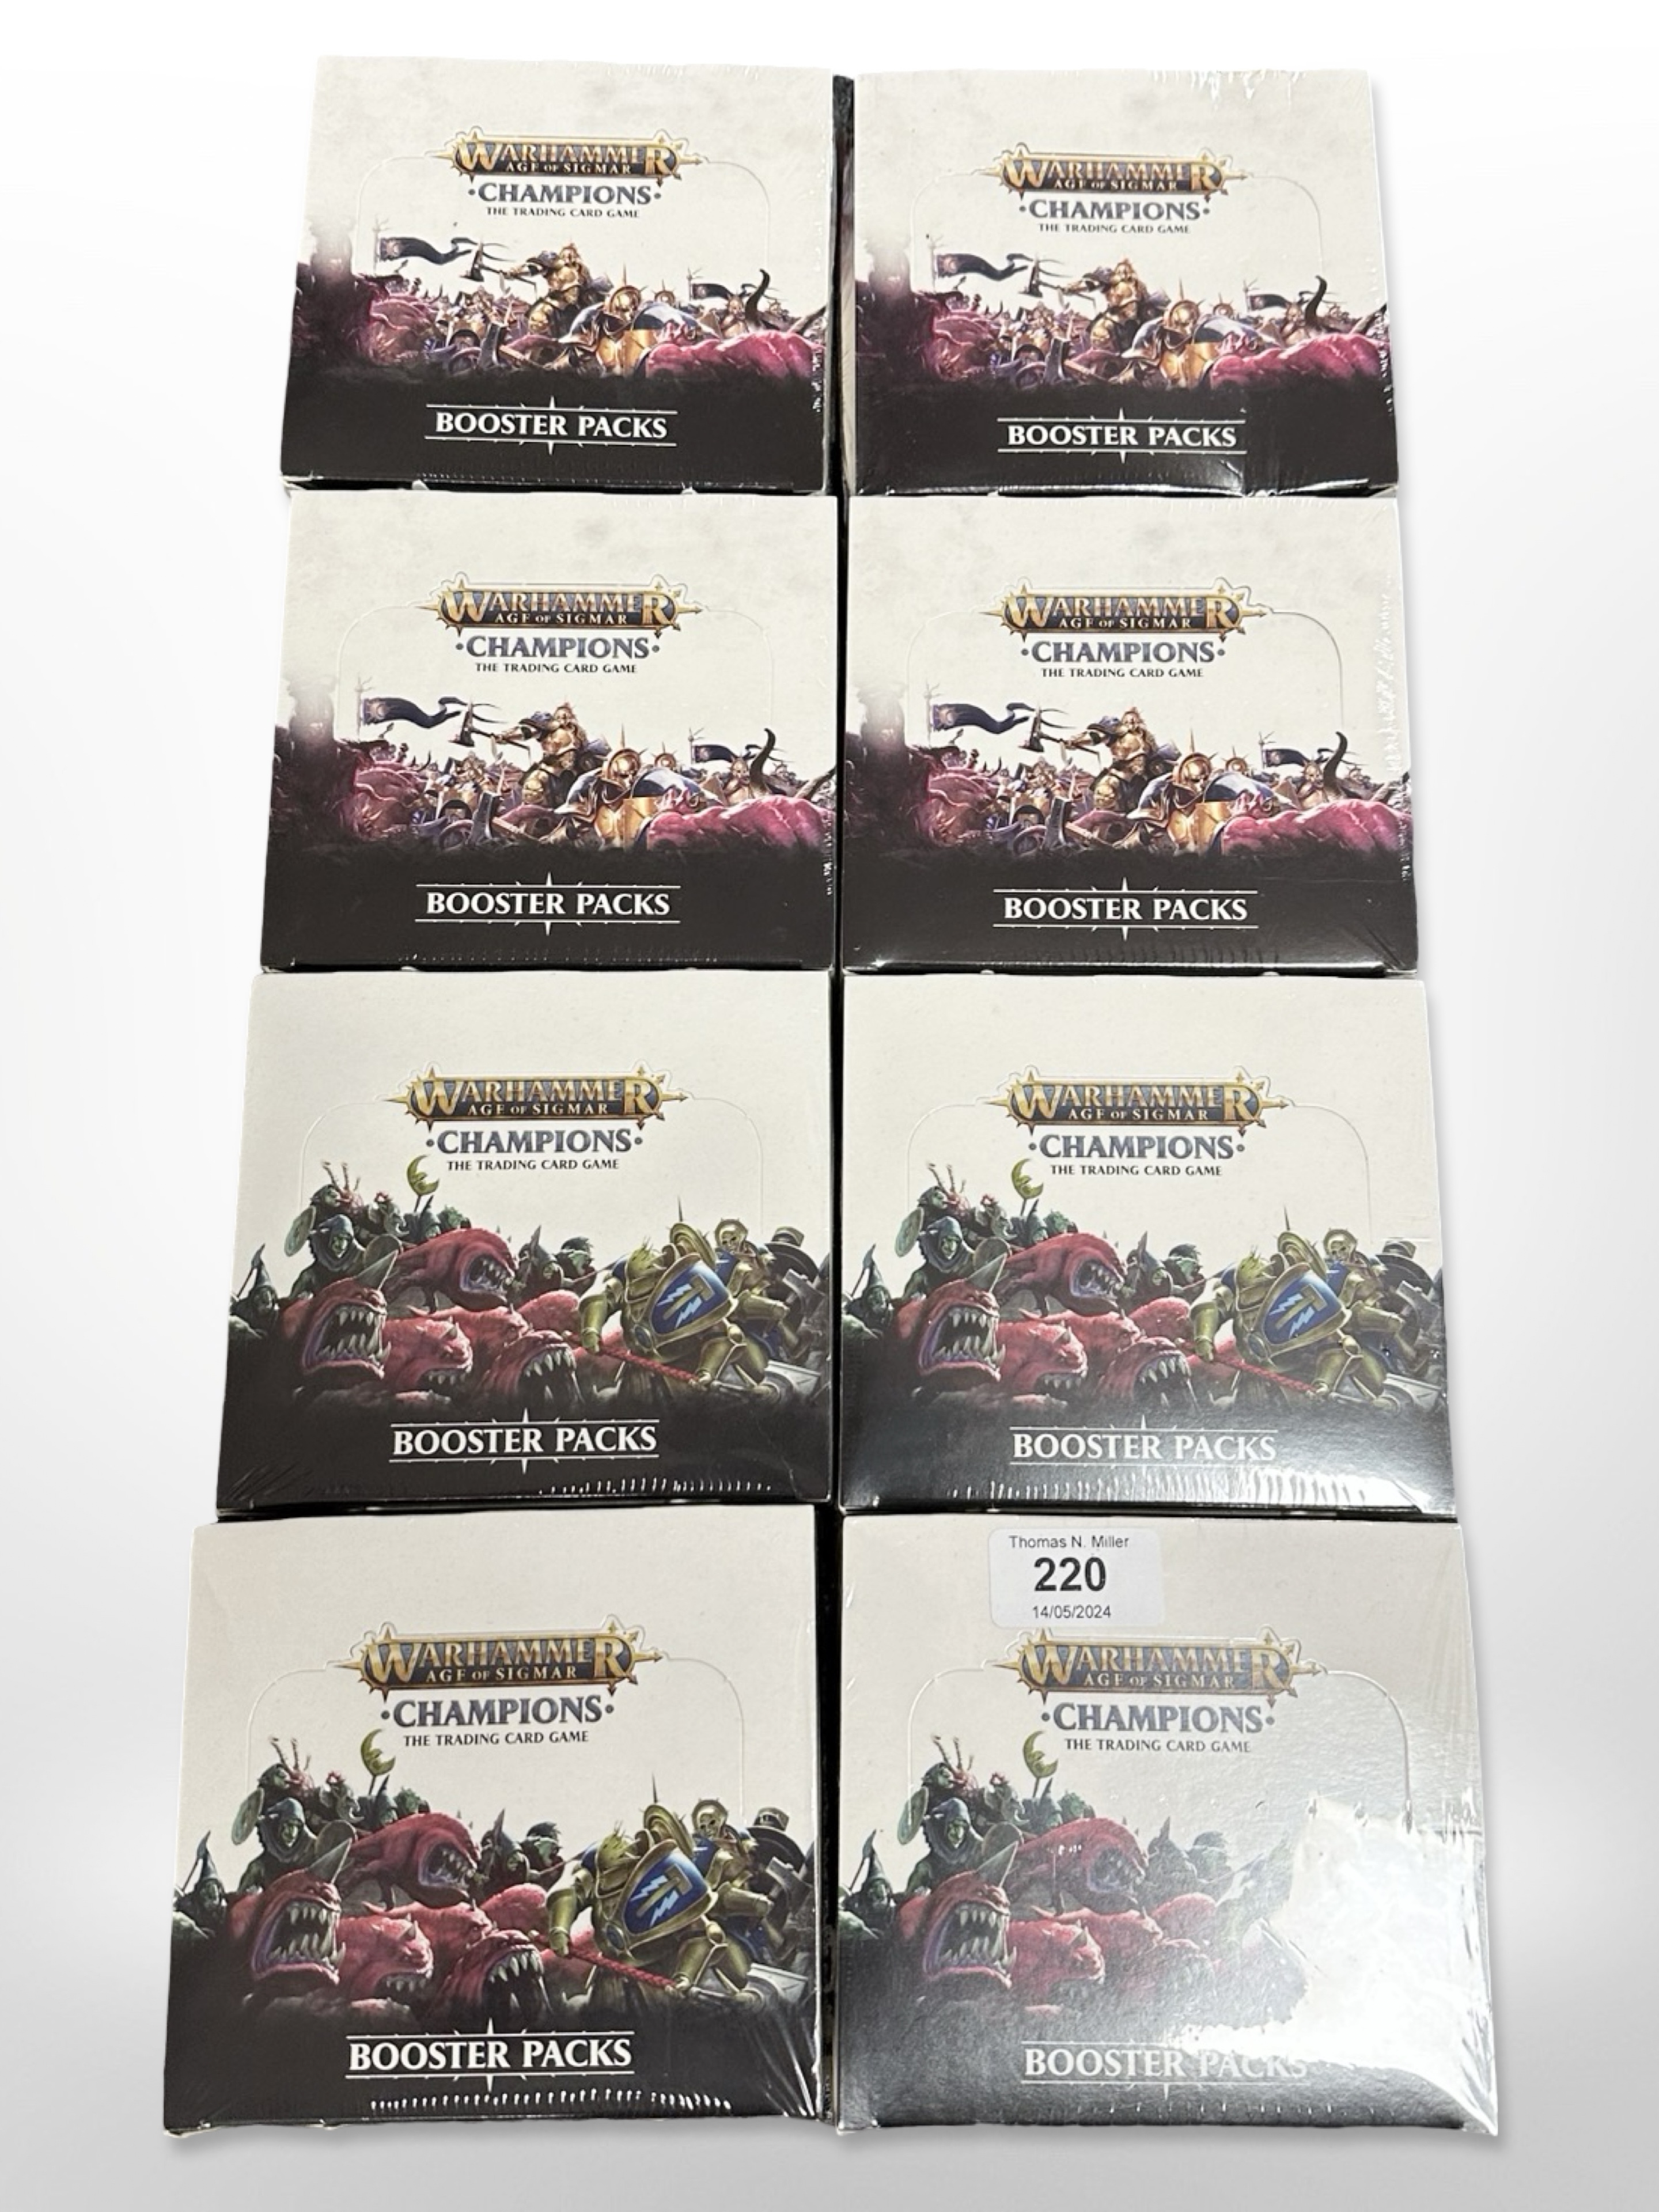 Eight Warhammer Age of Sigmar Champions Trading Card Game booster sets, all sealed in cellophane.